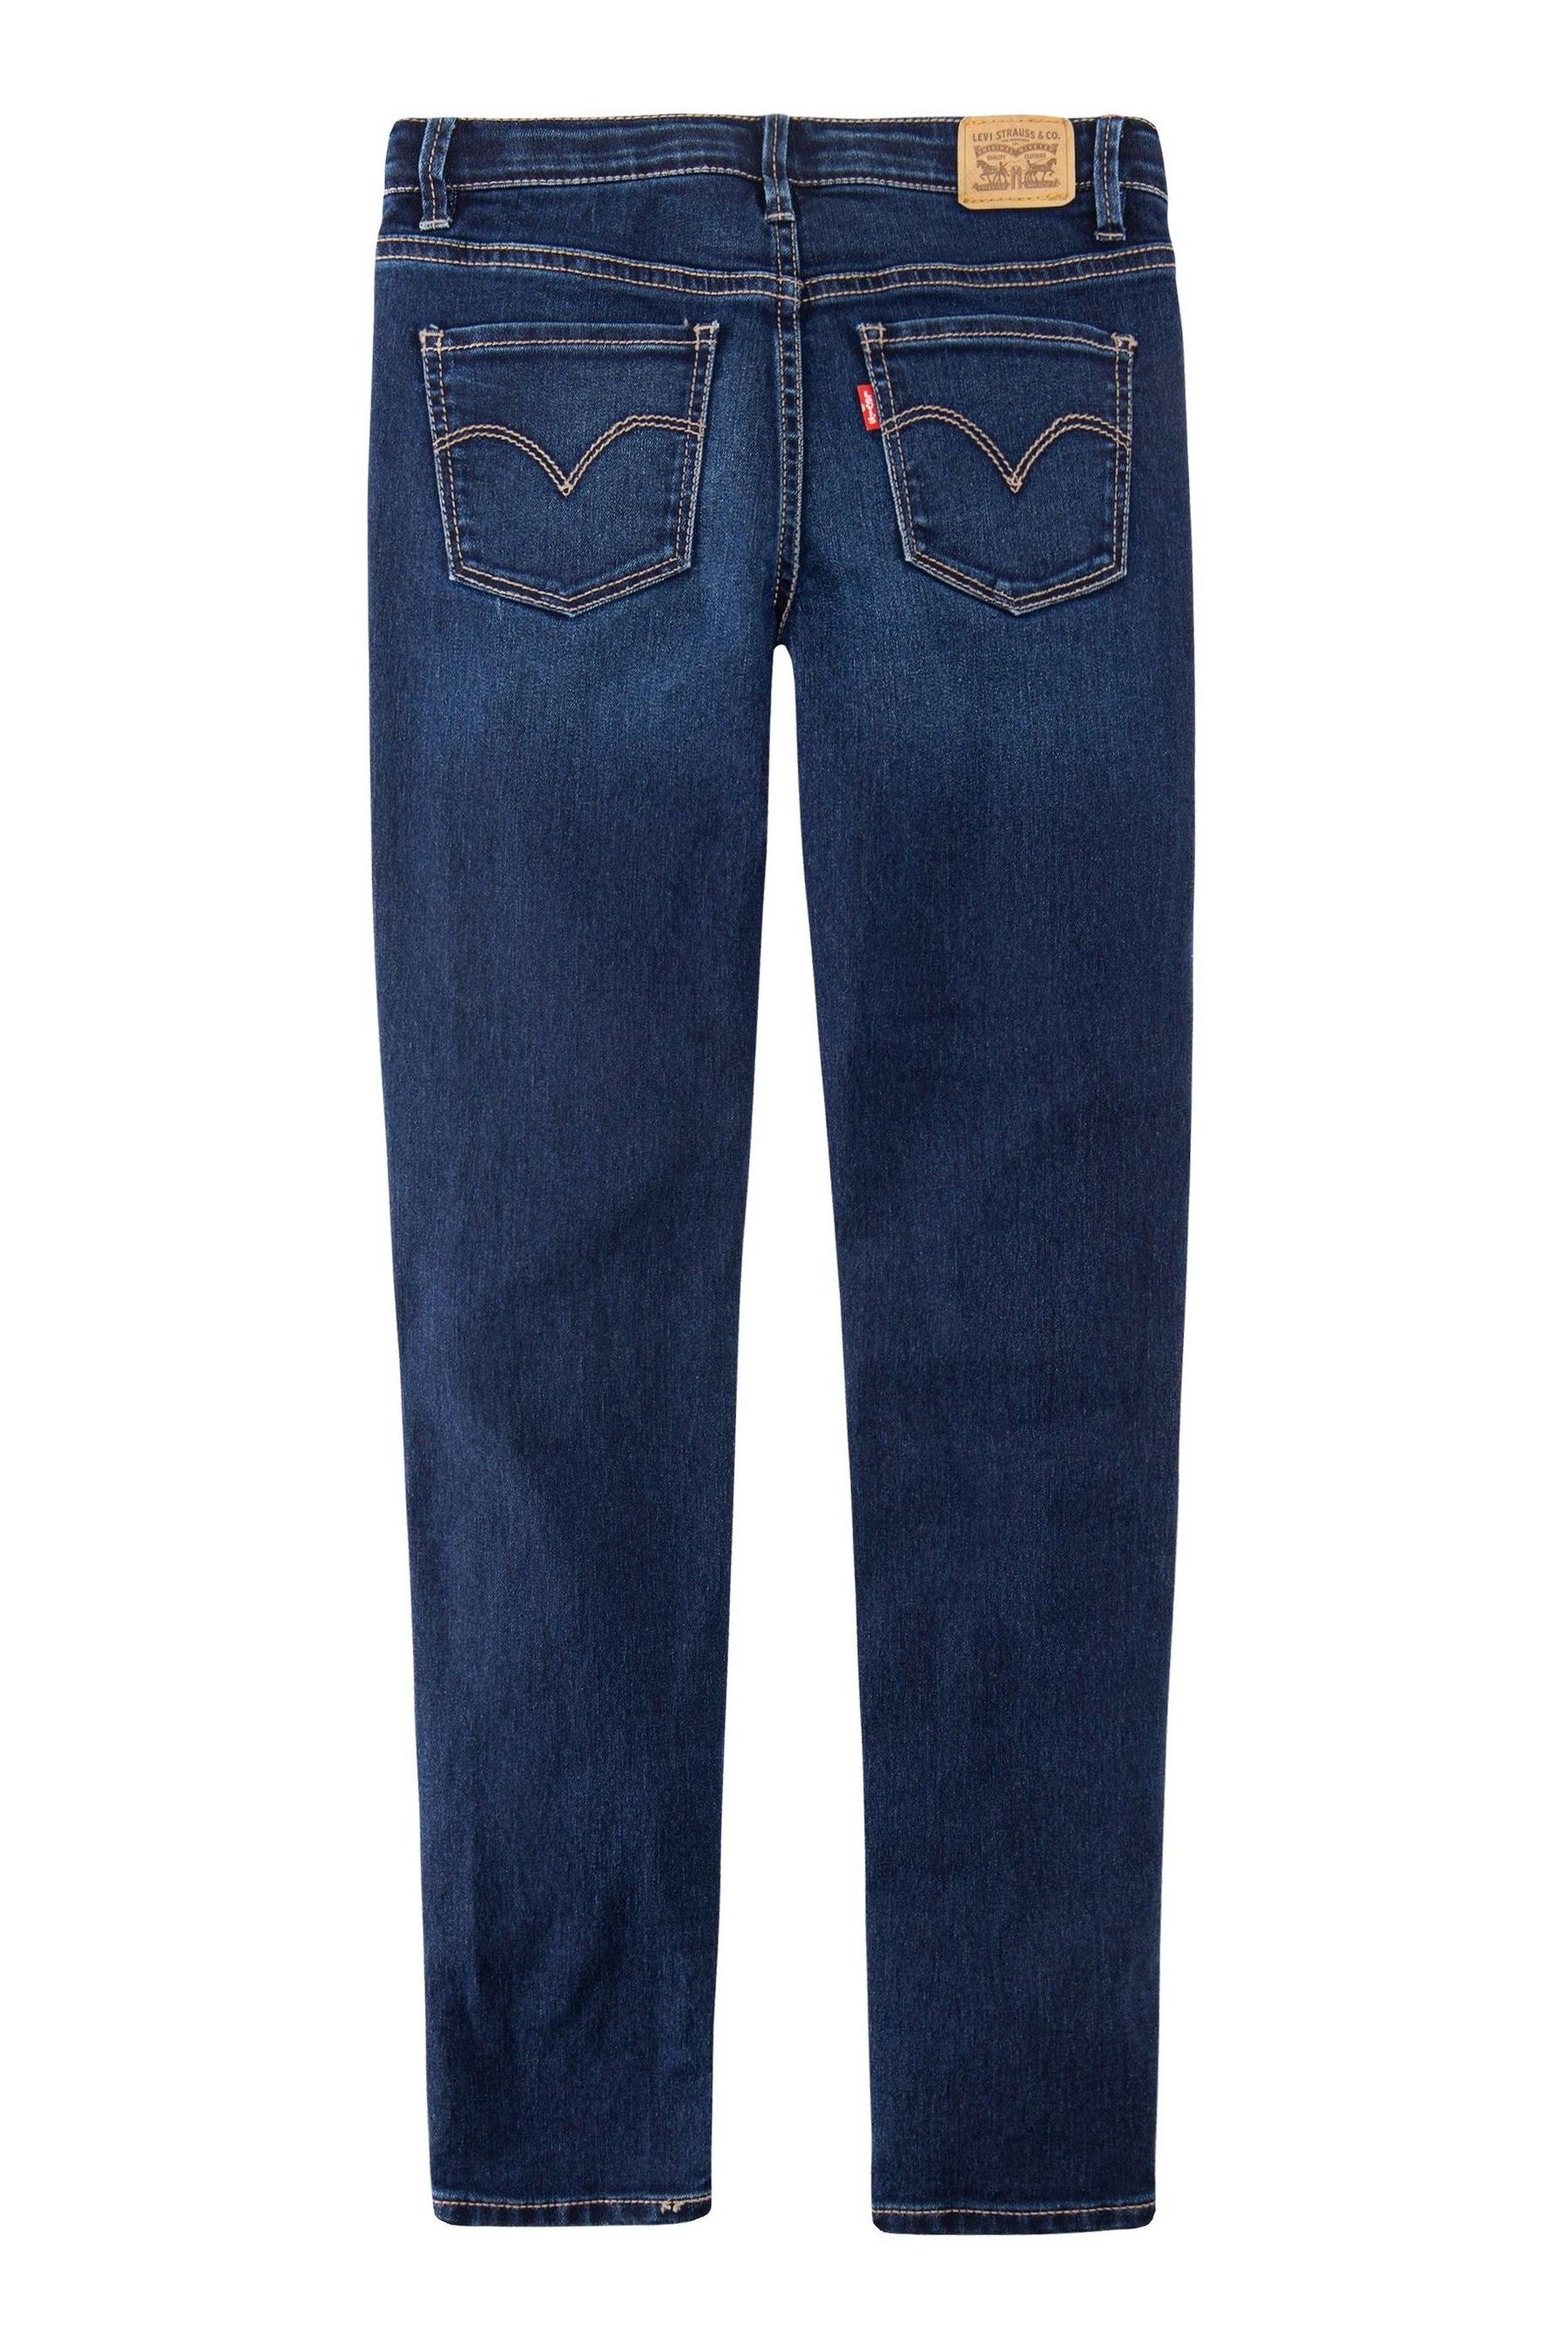 Buy Levi's® Complex 710™ Super Skinny Jeans from the Next UK online shop